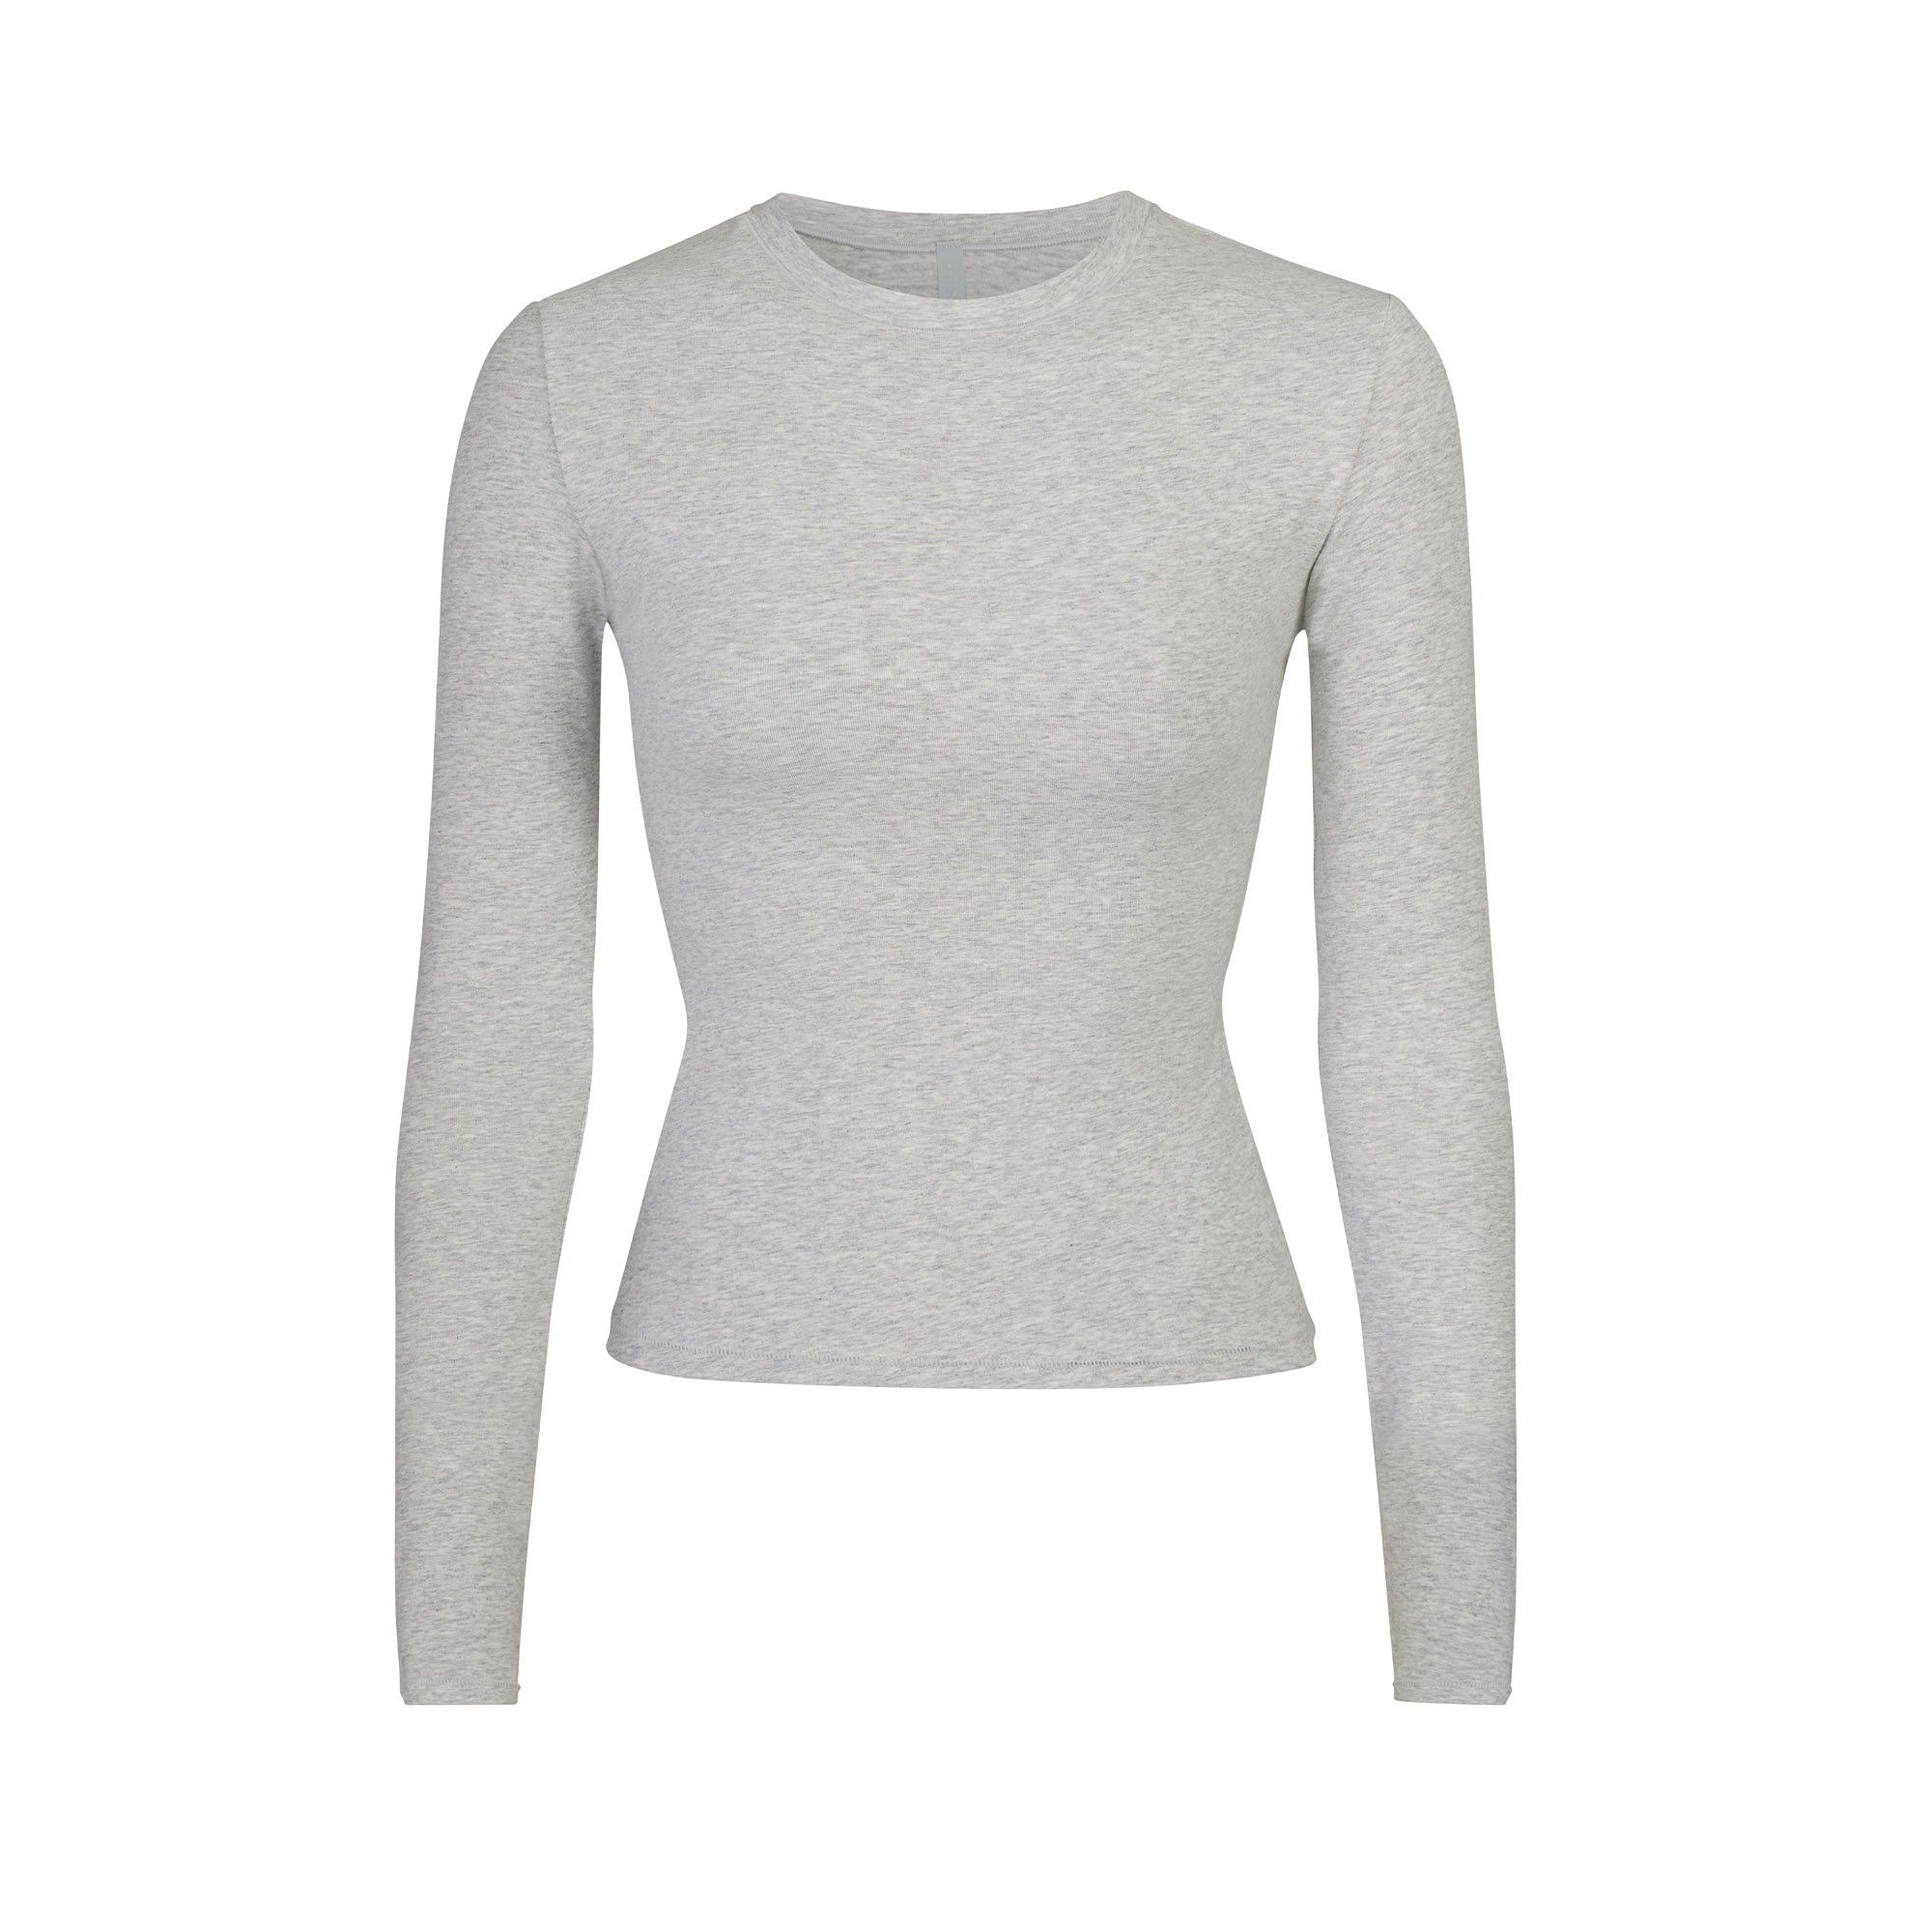 Attractive and elegant long sleeve t shirt